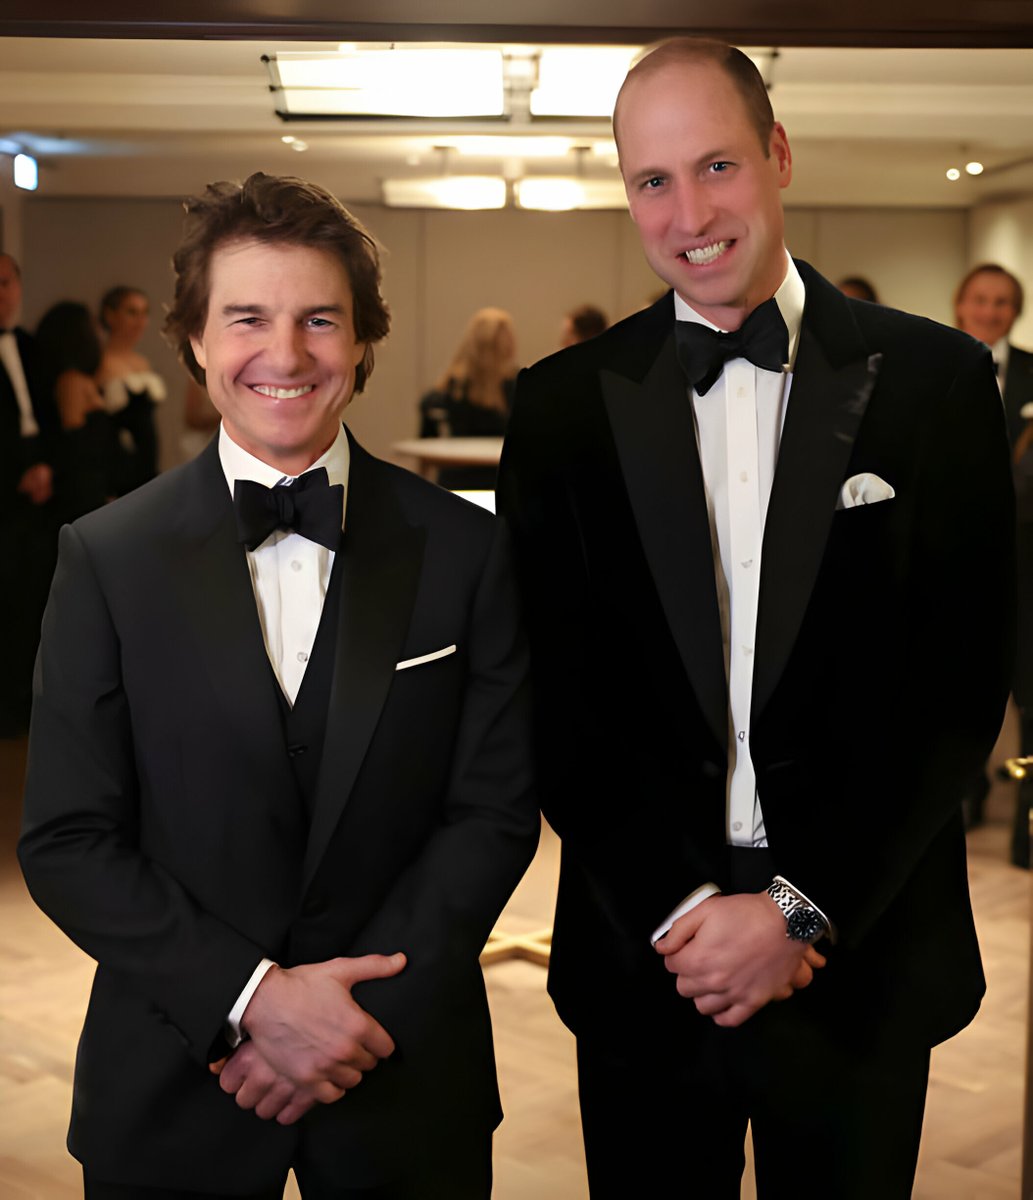 Tom Cruise's royal connection! From tea with the late Queen to charming Prince William, Cruise shines in the Royal spotlight. Is a knighthood next? #TomCruise #princewilliam #RoyalConnections #royalfamily #entertainment #celebrity #KingCharles